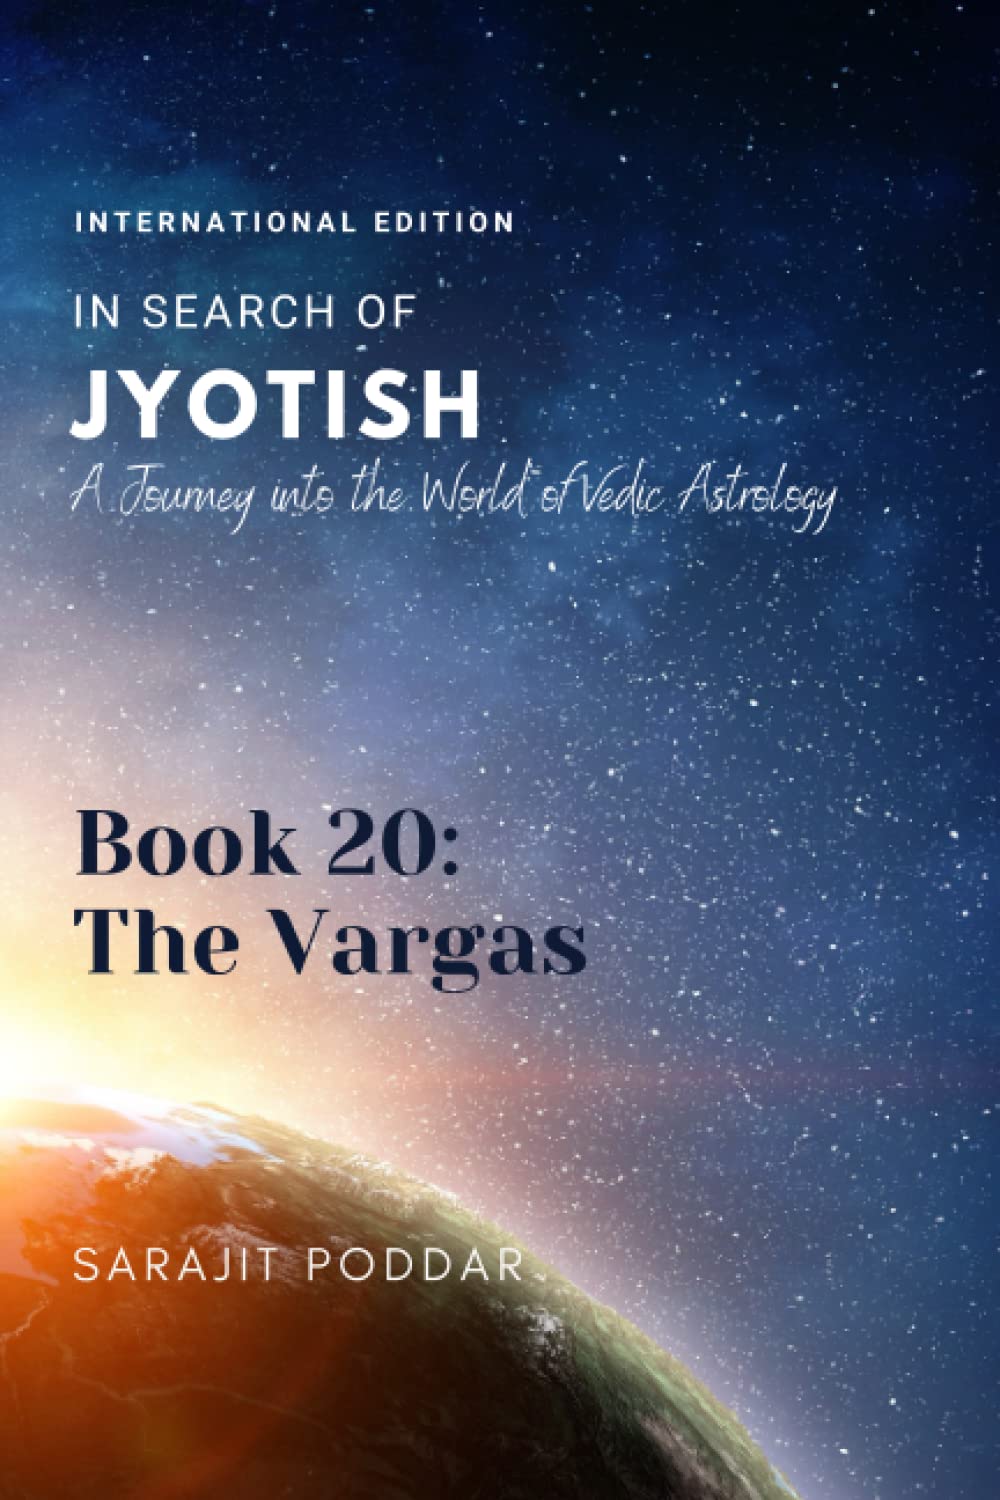 The Vargas: A Journey into the World of Vedic Astrology